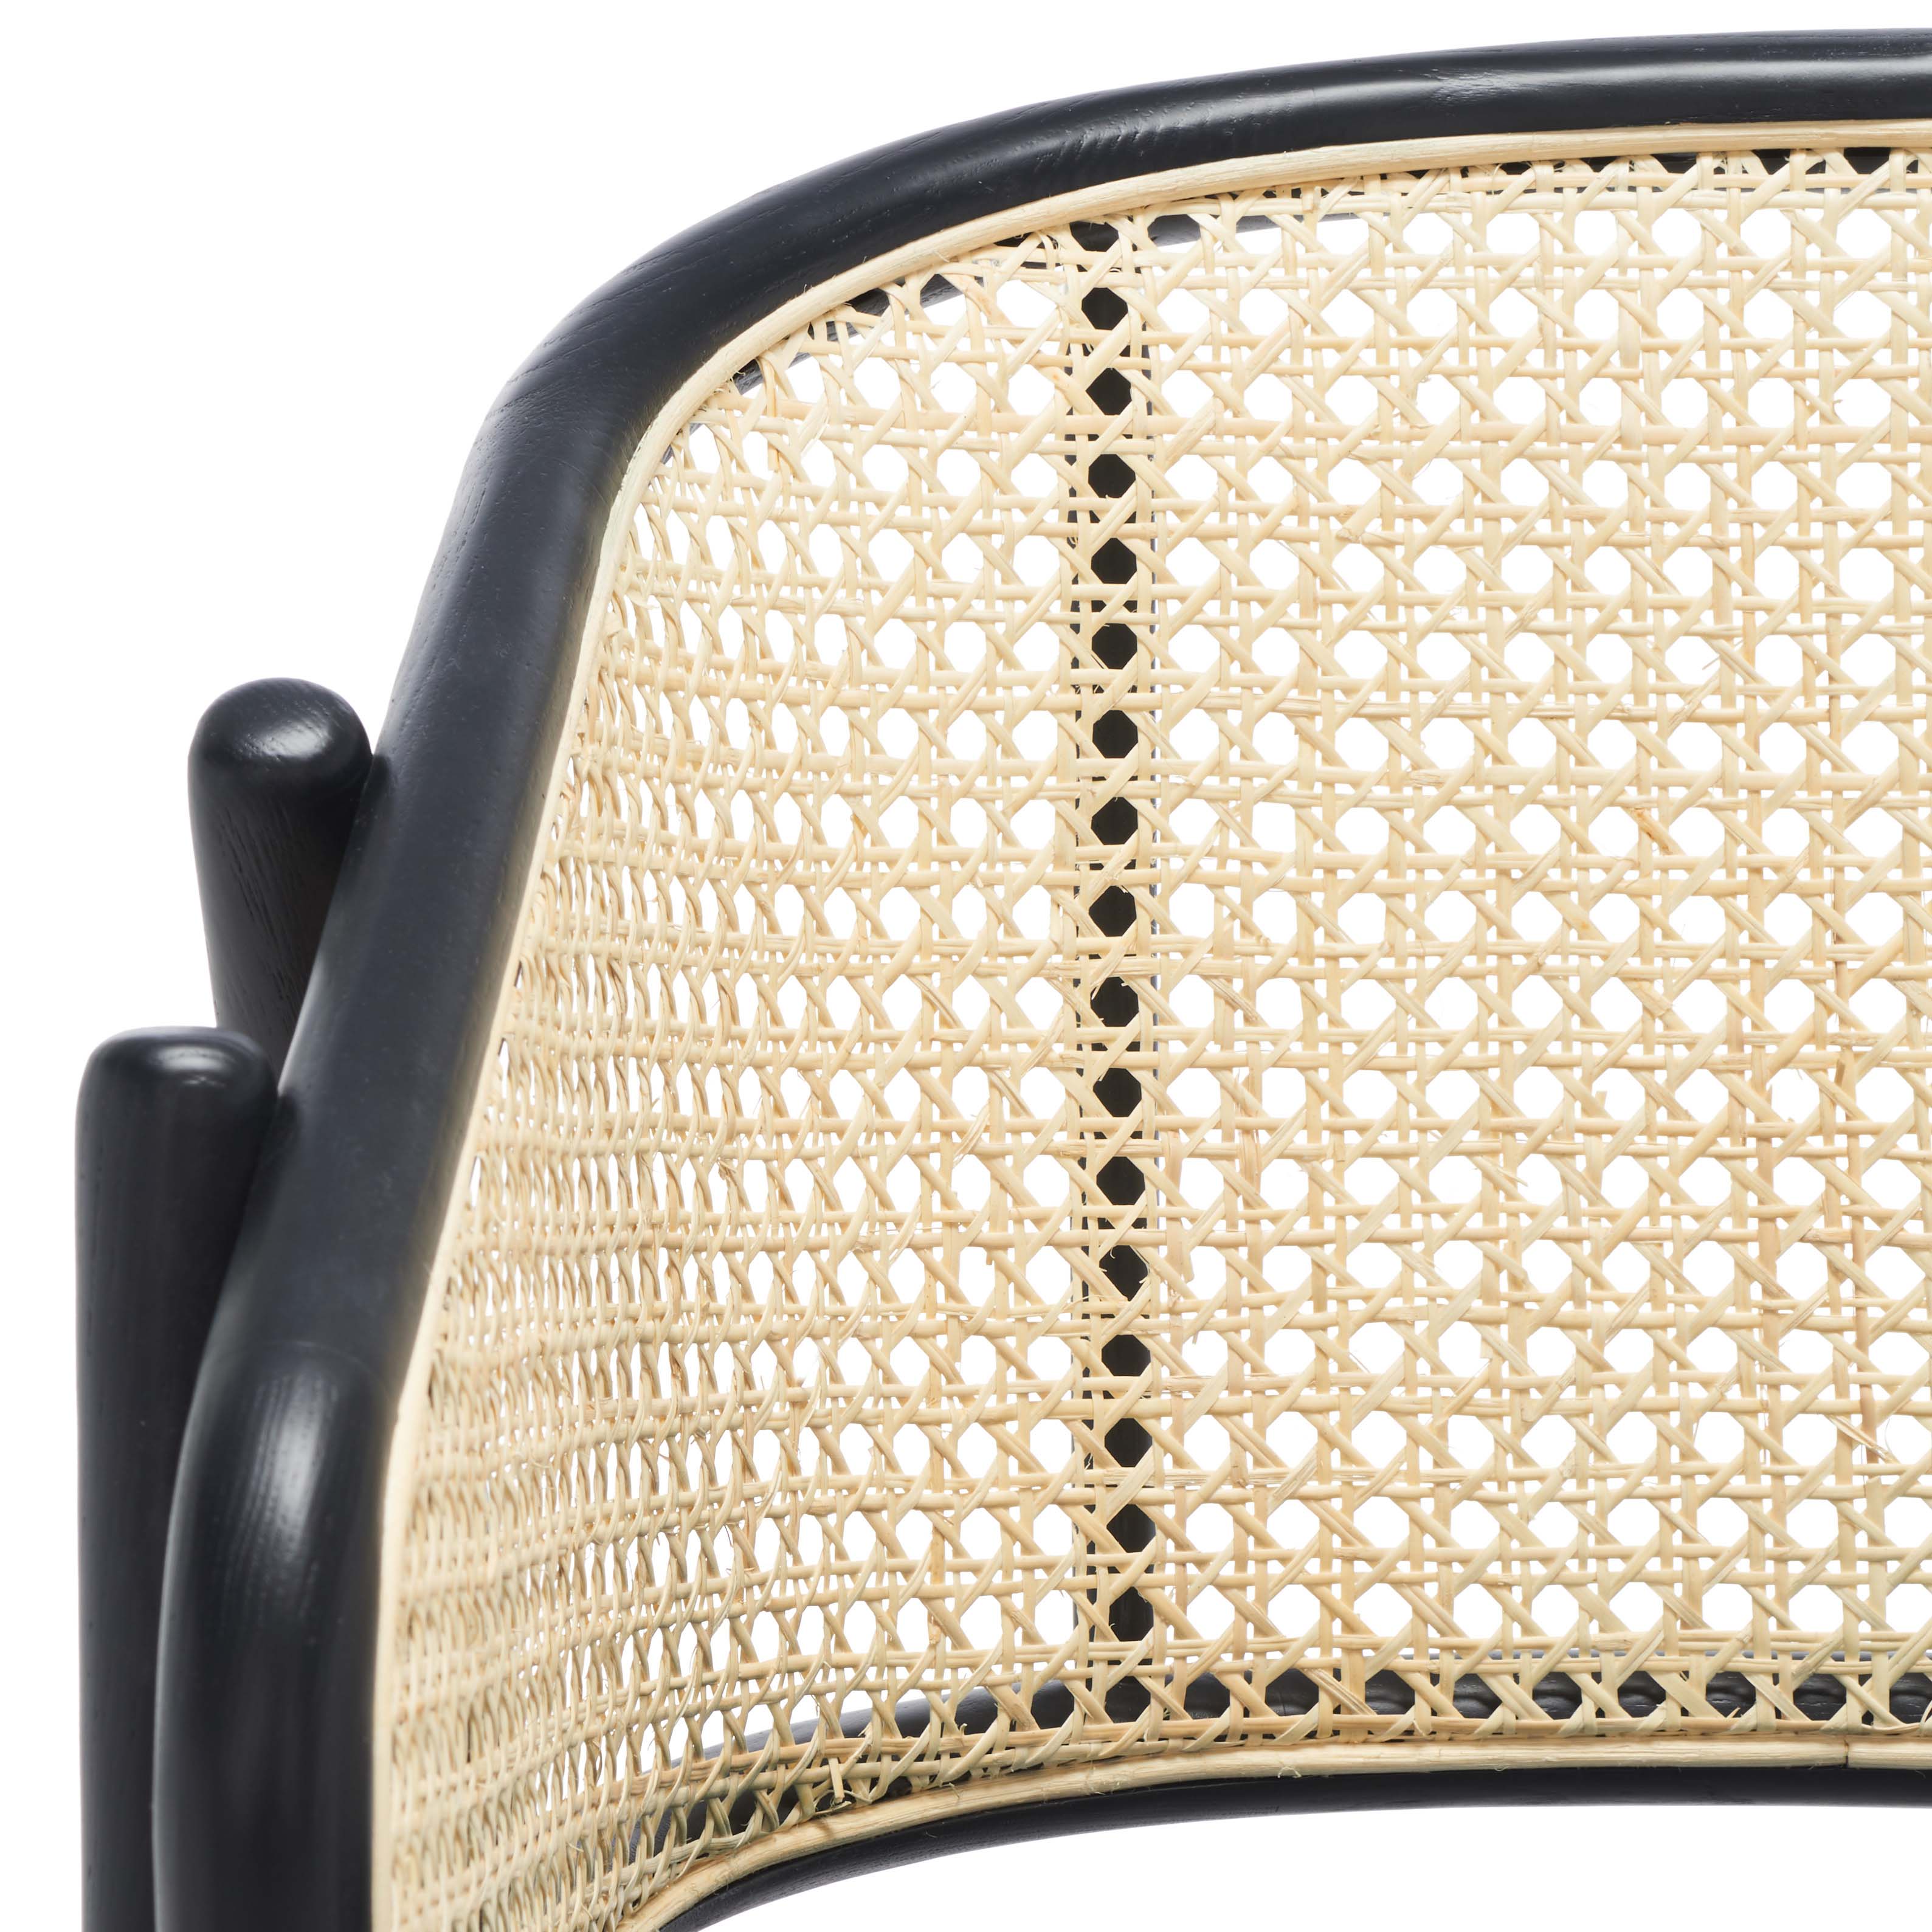 Safavieh Couture Emmy Rattan Back Dining Chair , SFV4128 - Black / Natural